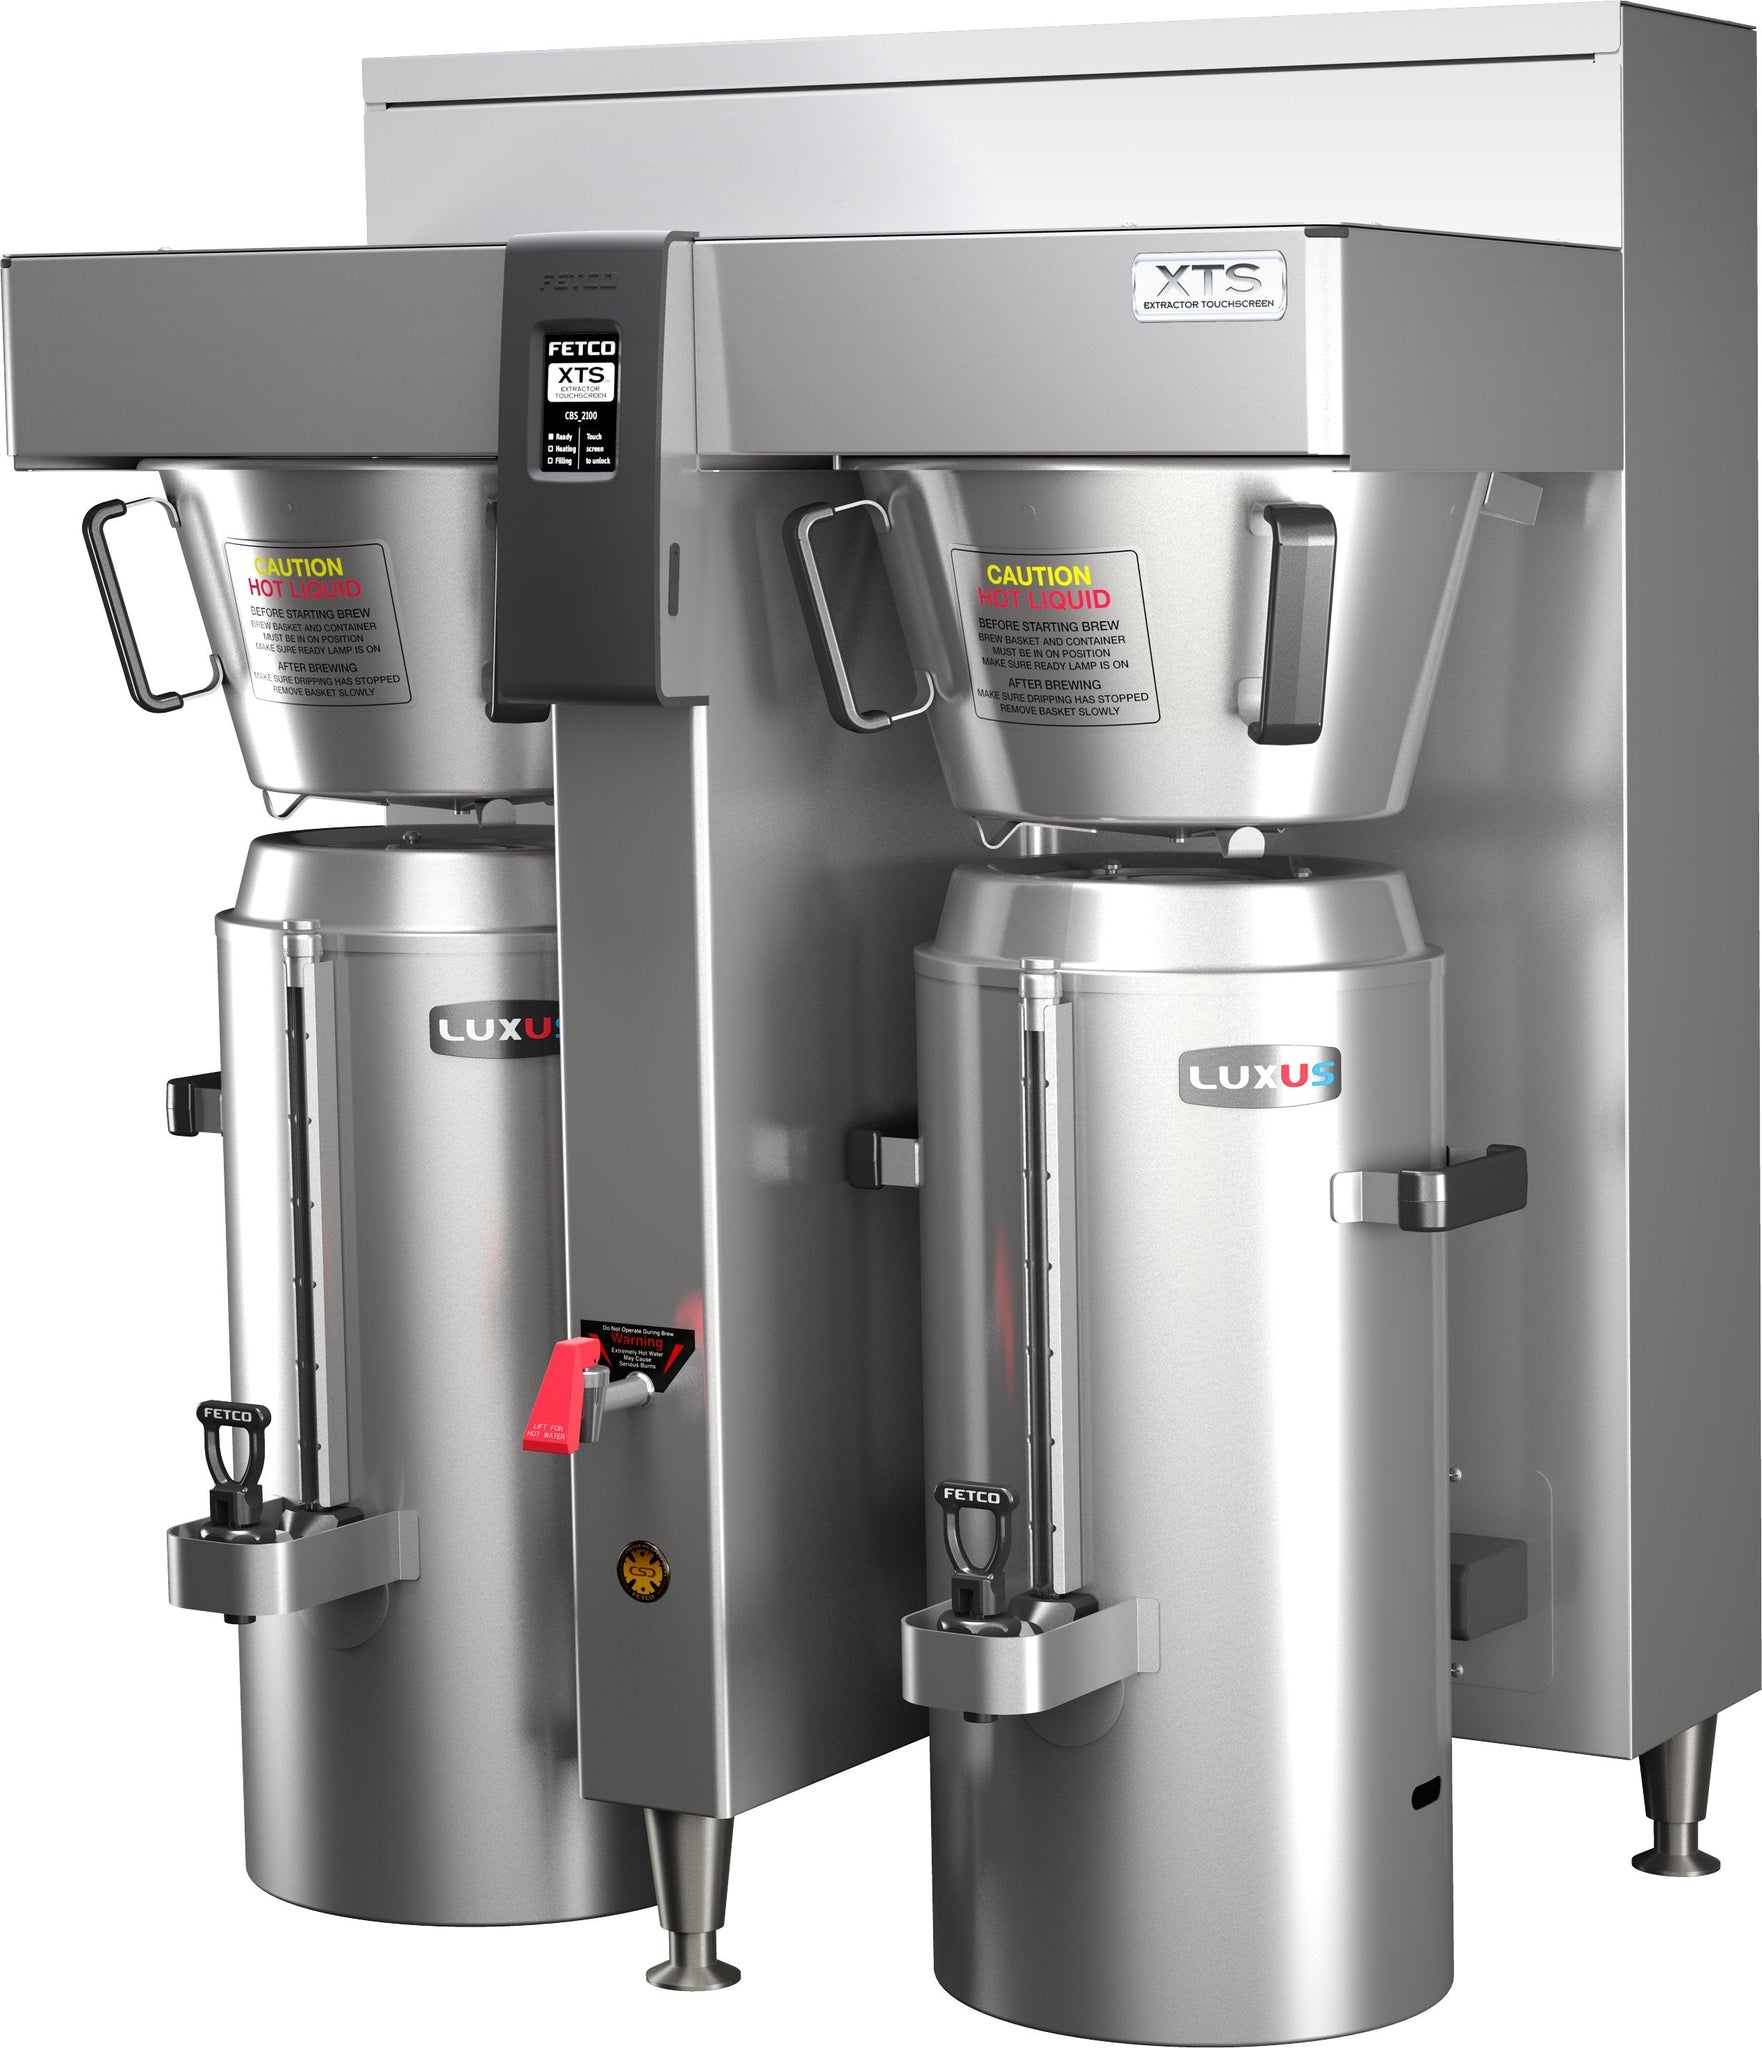 Fetco - Touchscreen Series Coffee Brewer Double Station 3 x 3 kW 200-240V - CBS-2162XTS